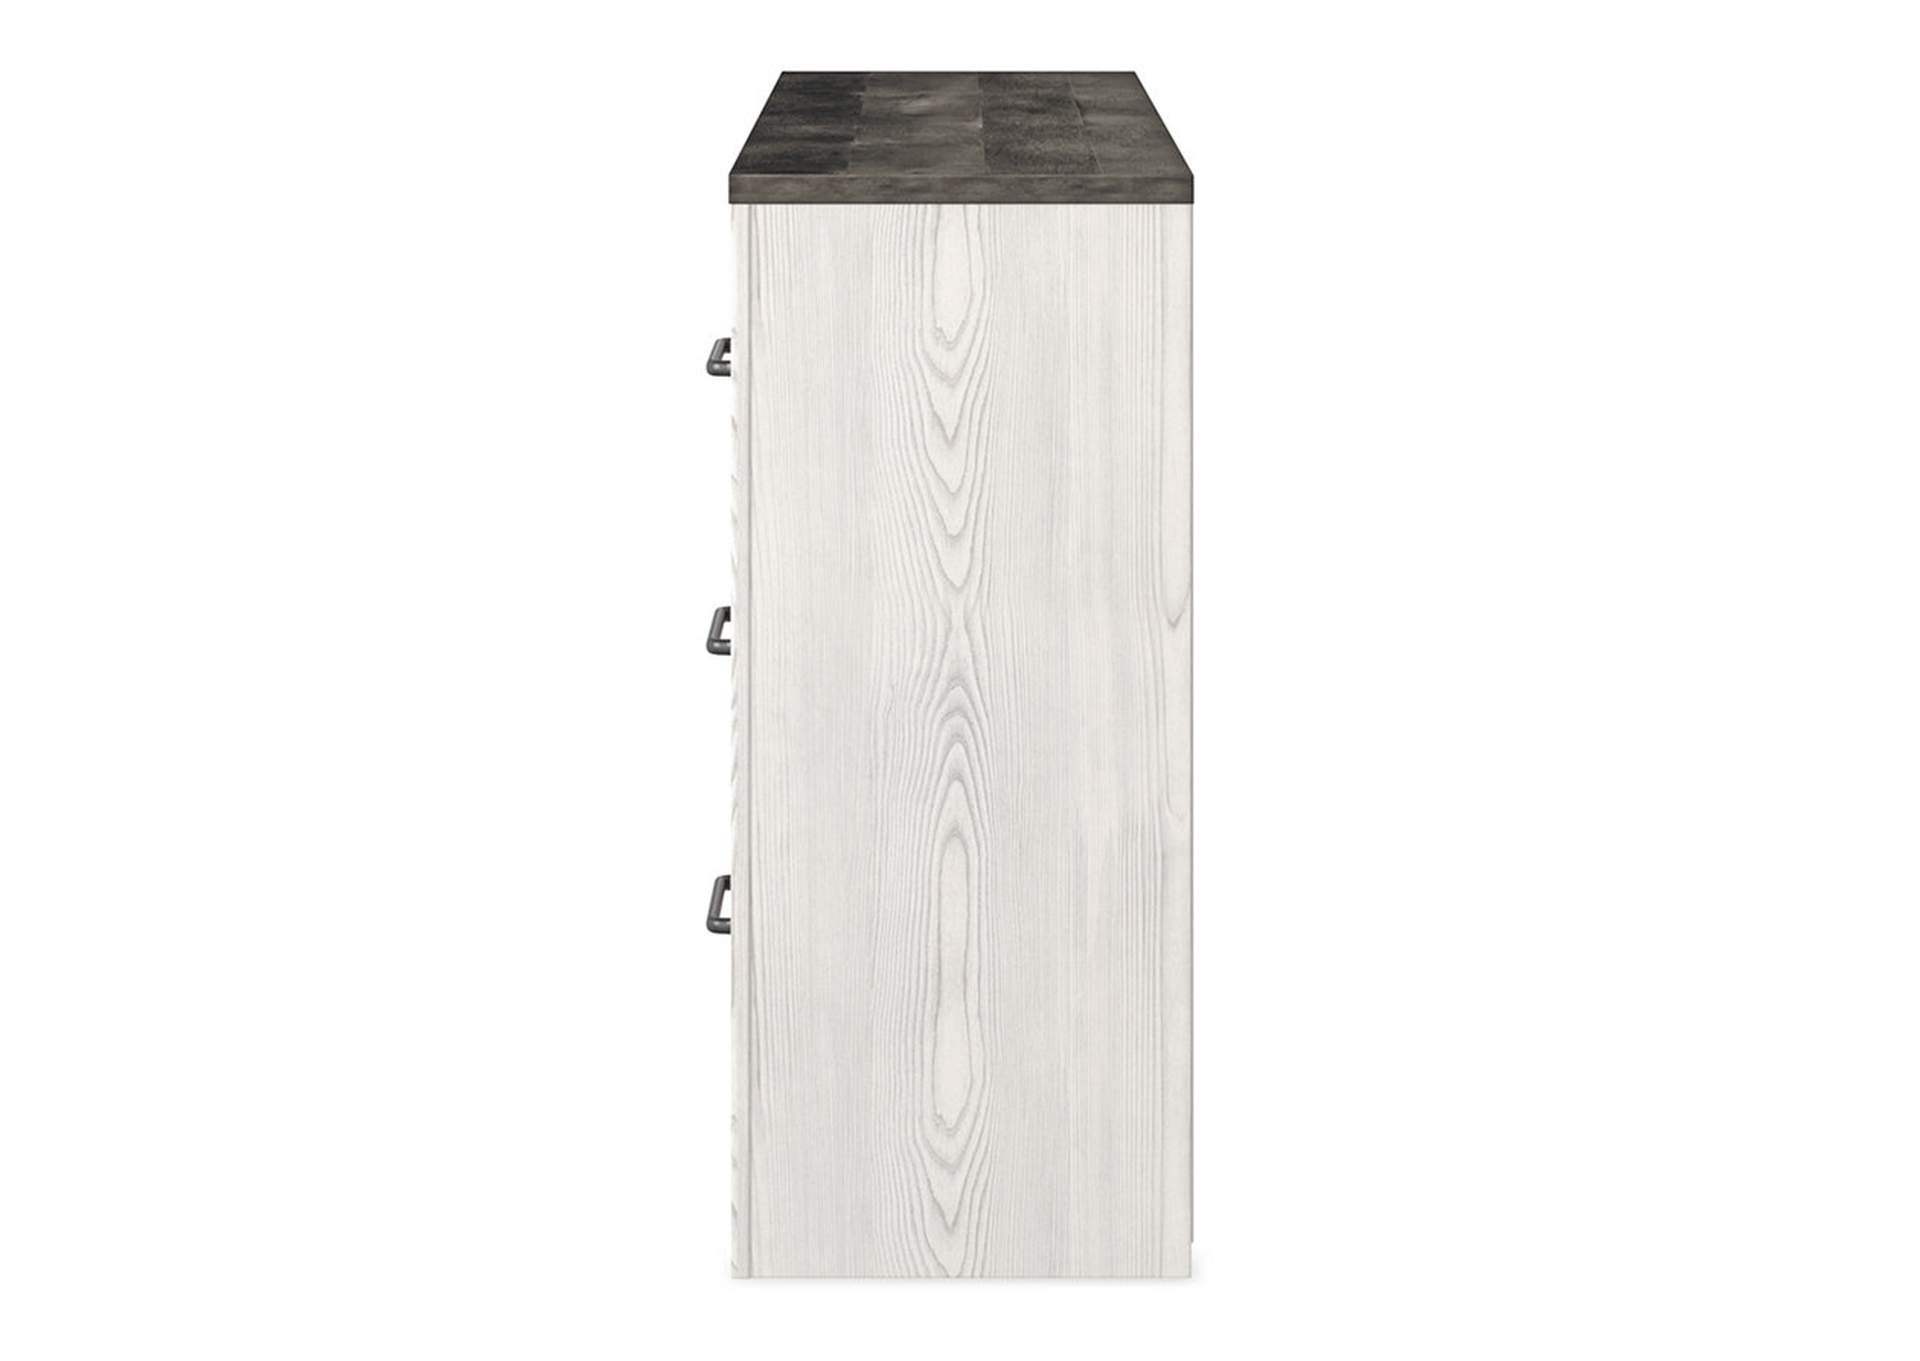 Gerridan King Panel Bed, Dresser and Nightstand,Signature Design By Ashley